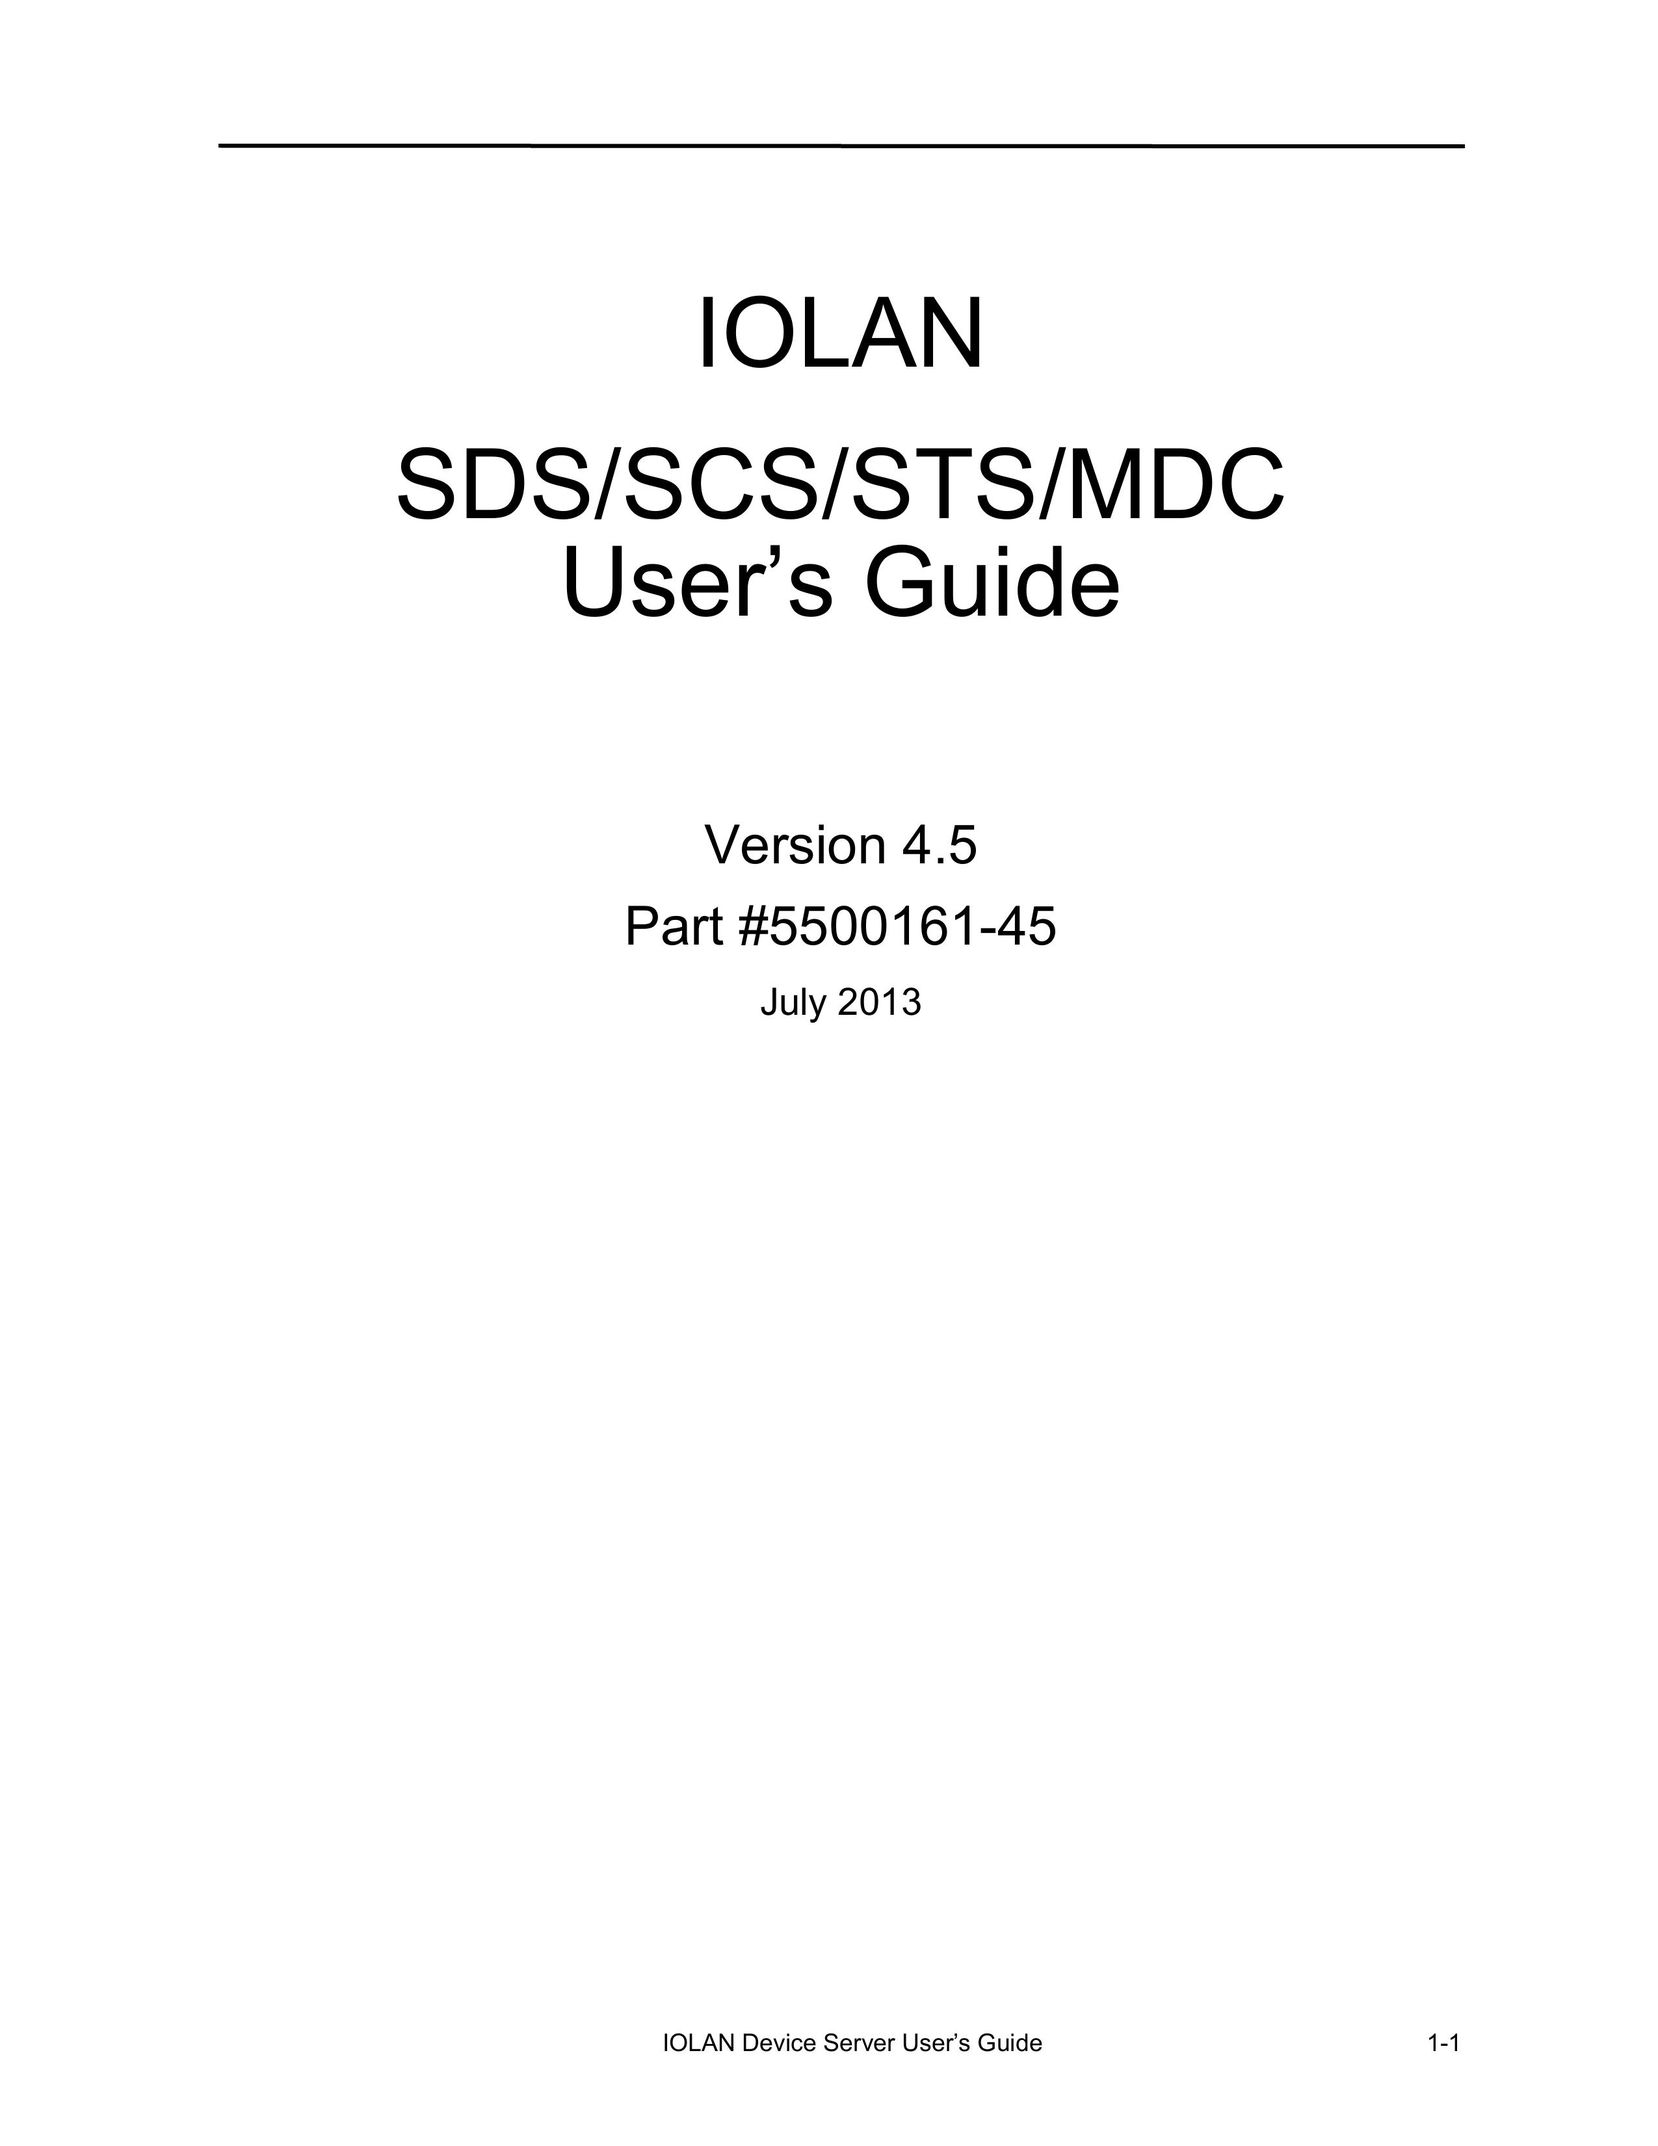 Perle Systems SCS8C DC Server User Manual